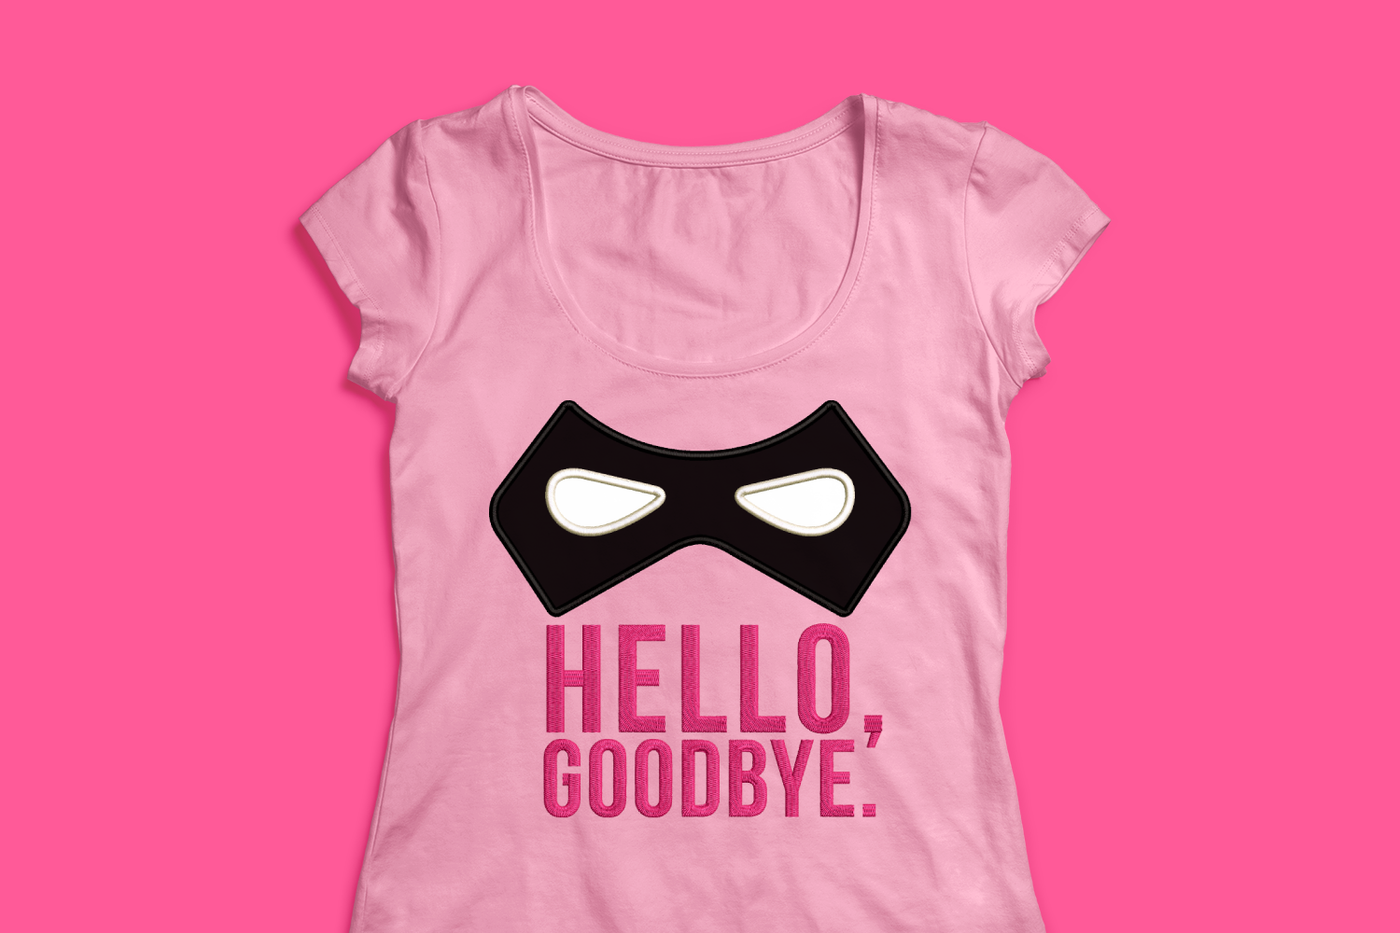 Applique mask with embroidered words "hello, goodbye"